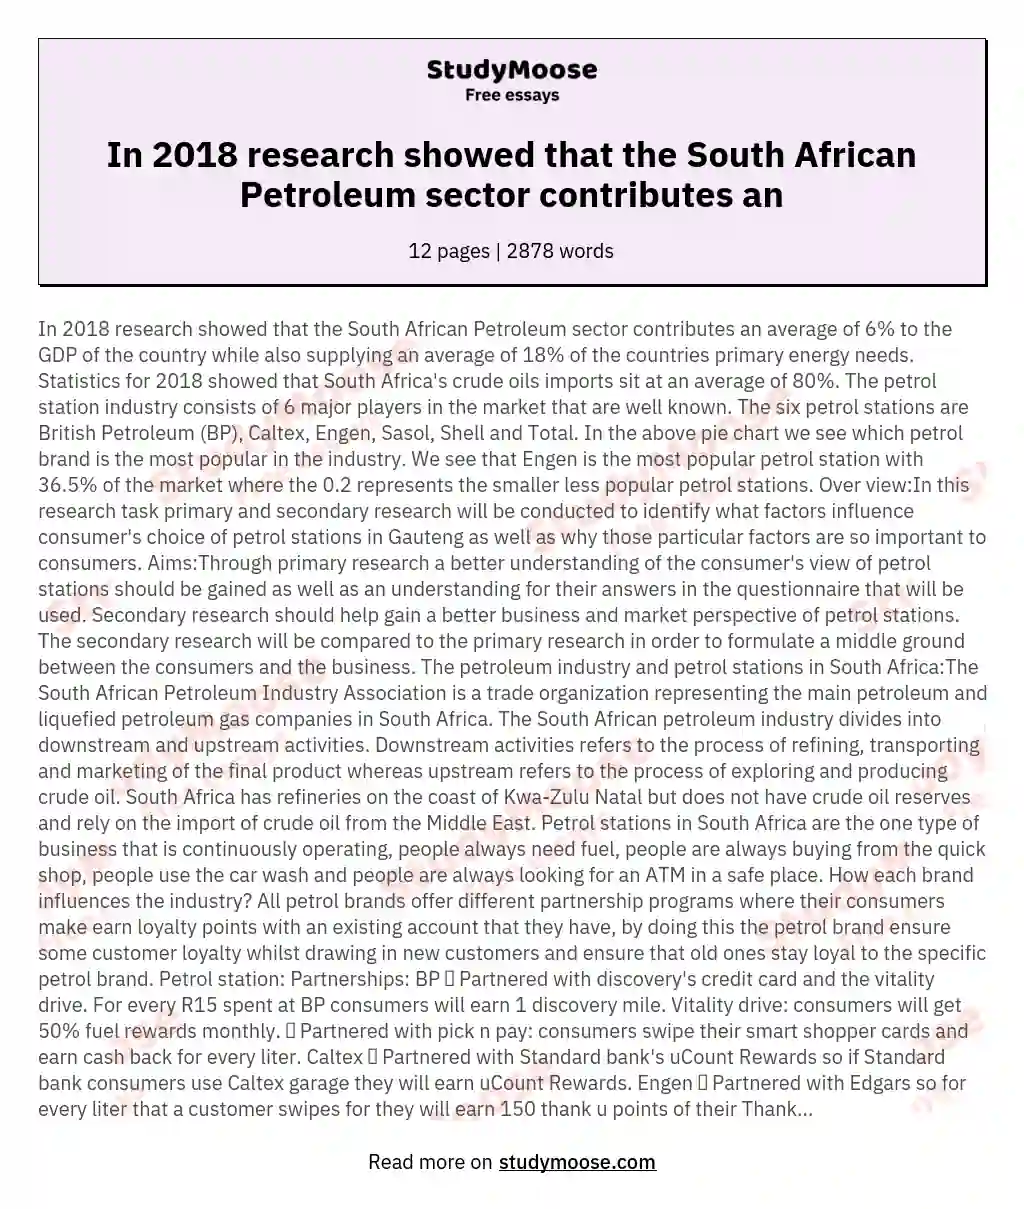 In 2018 research showed that the South African Petroleum sector contributes an